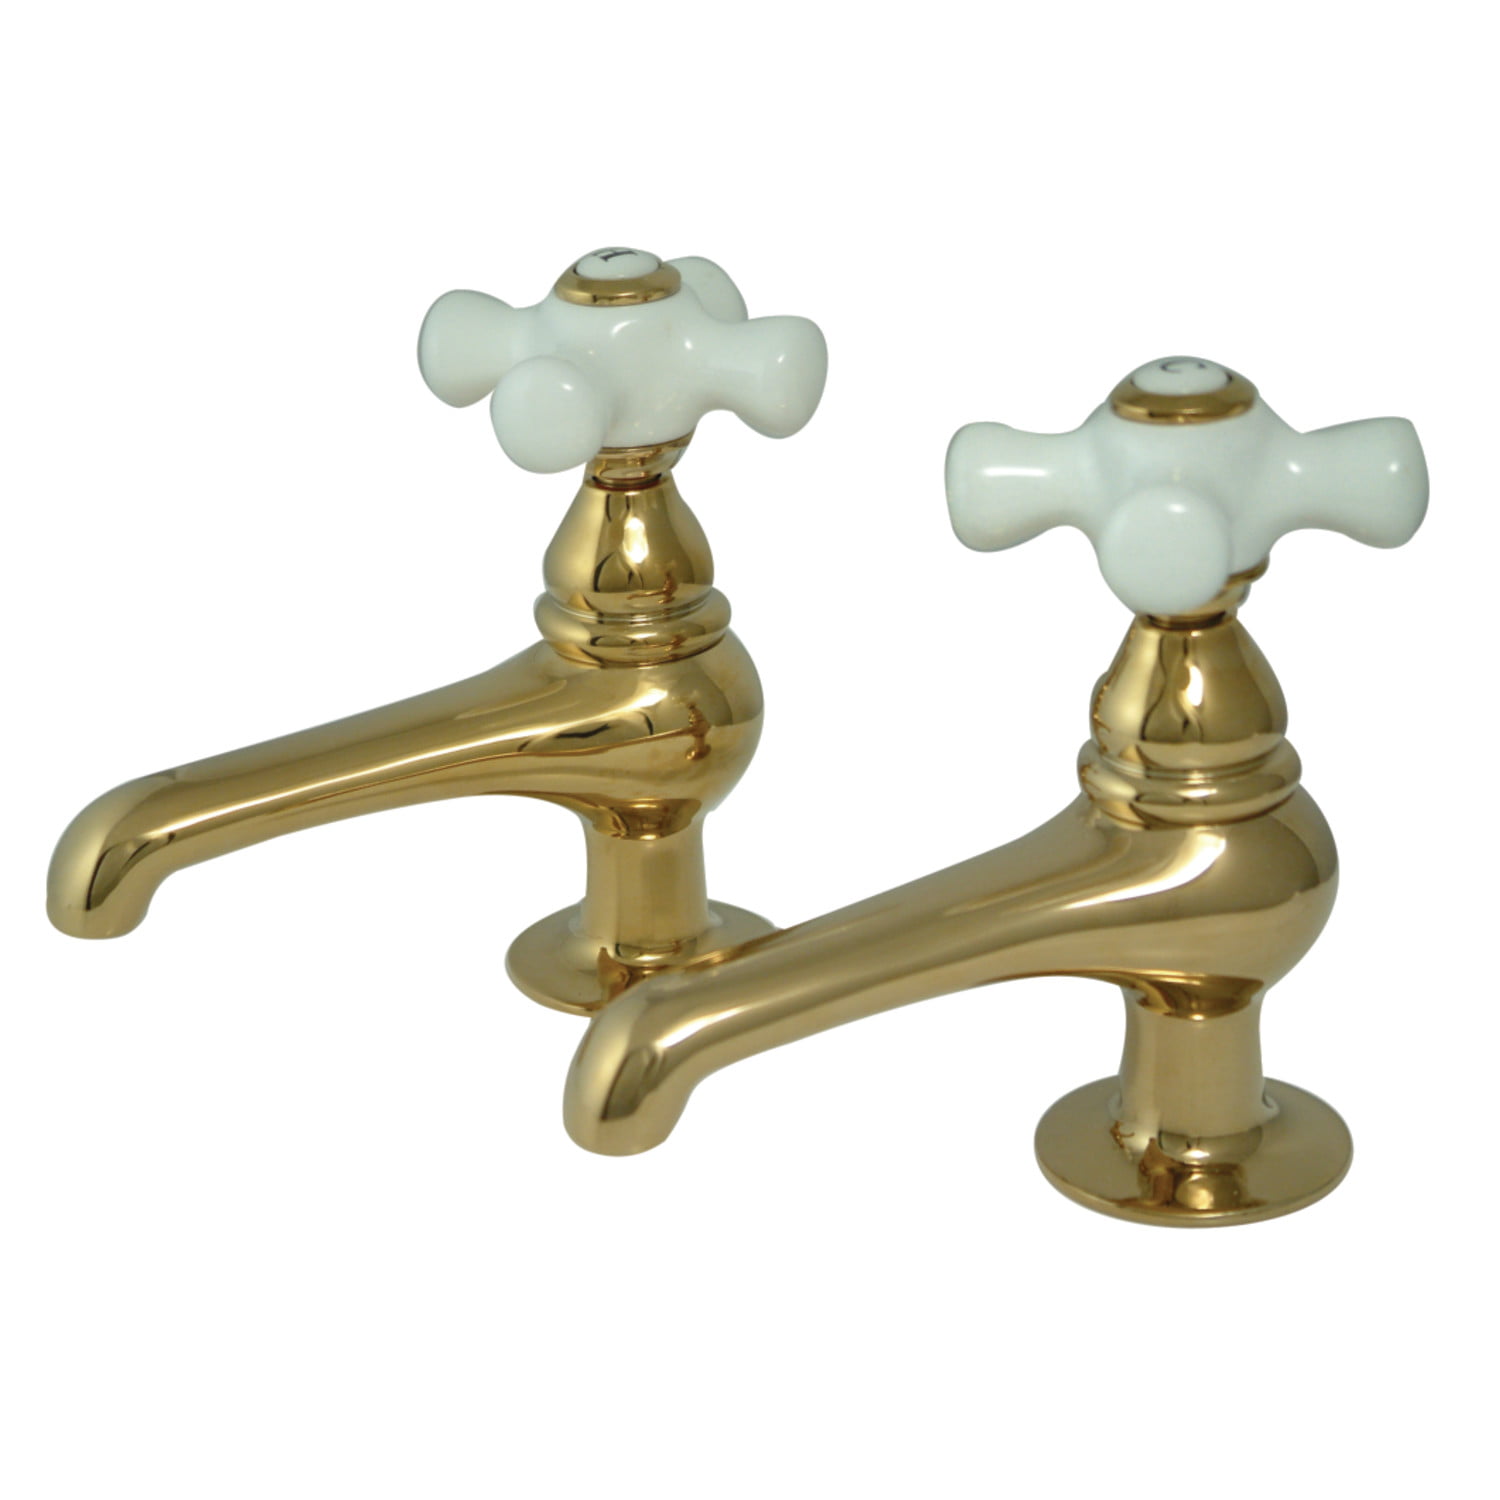 1/2" High Quality Polished Brass Tap Faucet Mixer Basin Garden Bathroom Kitchen 